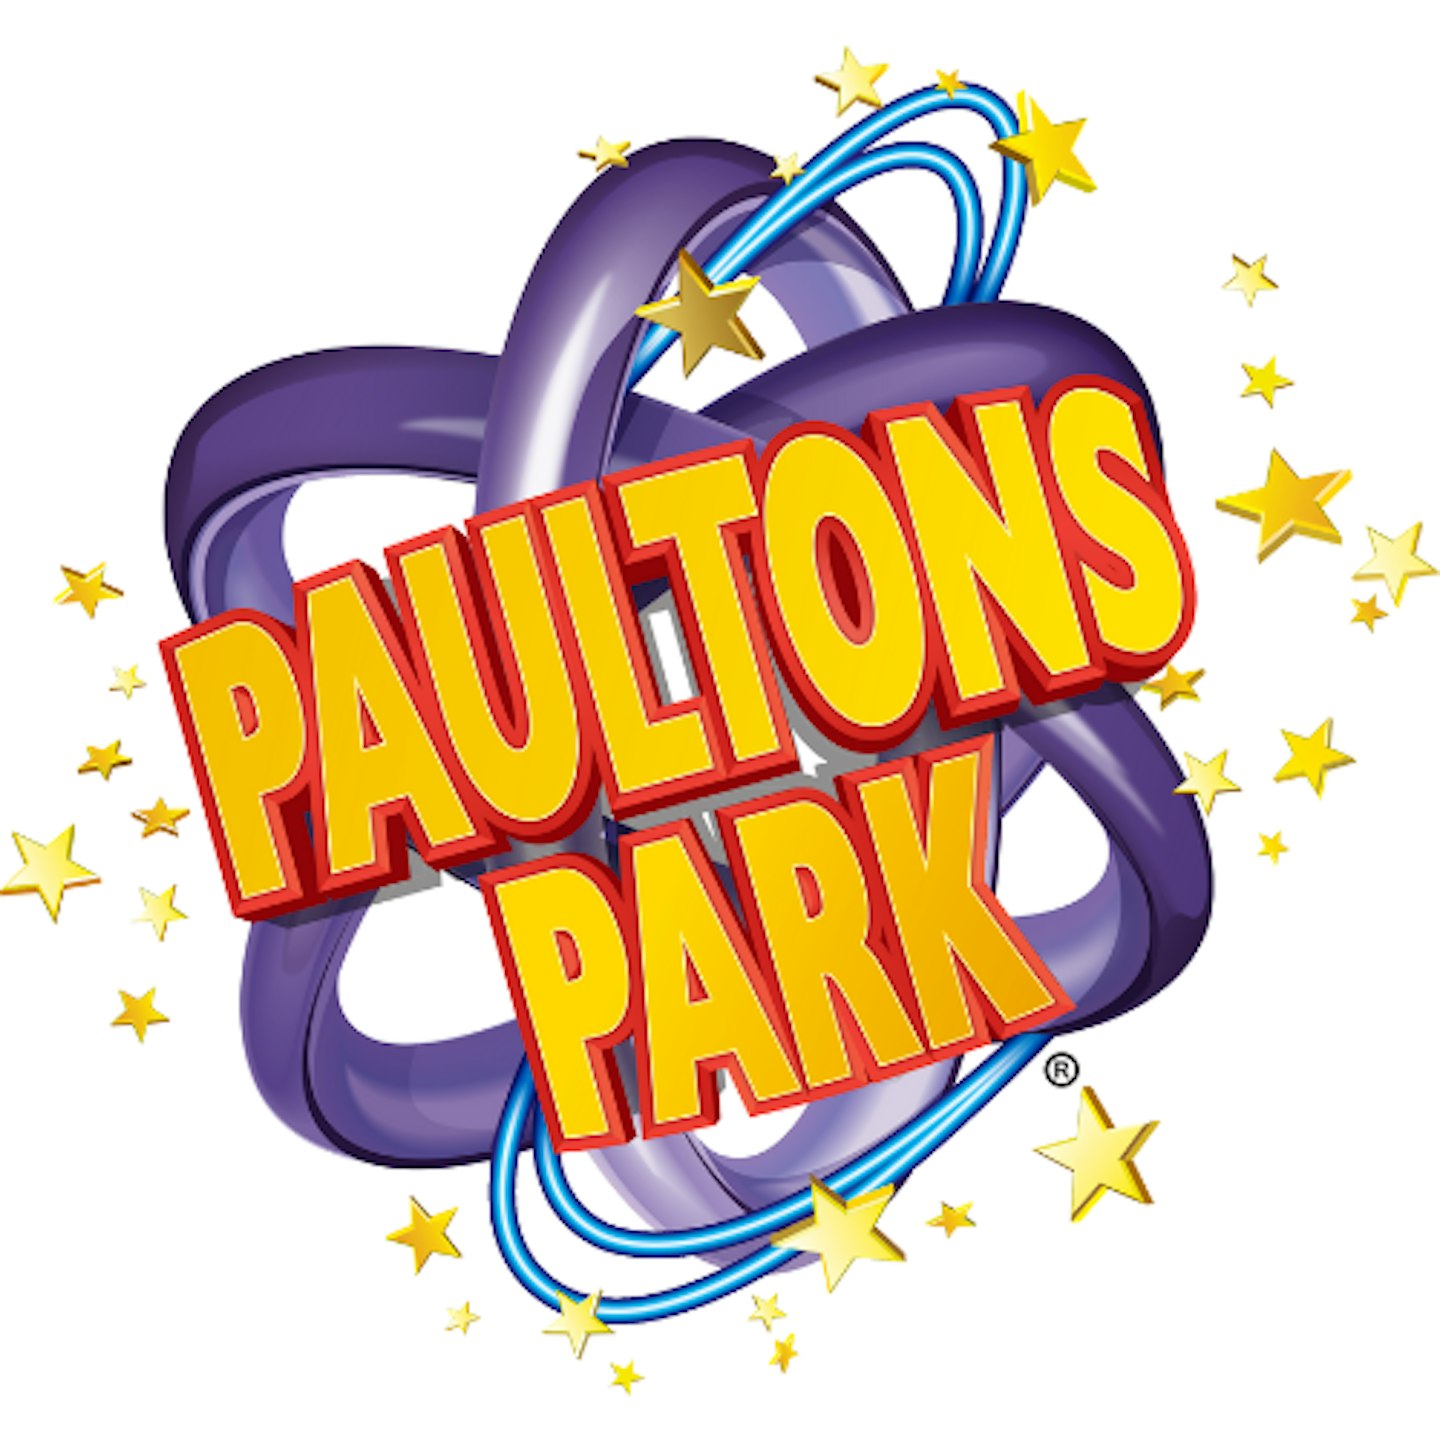 Paultons Park competitions for free tickets